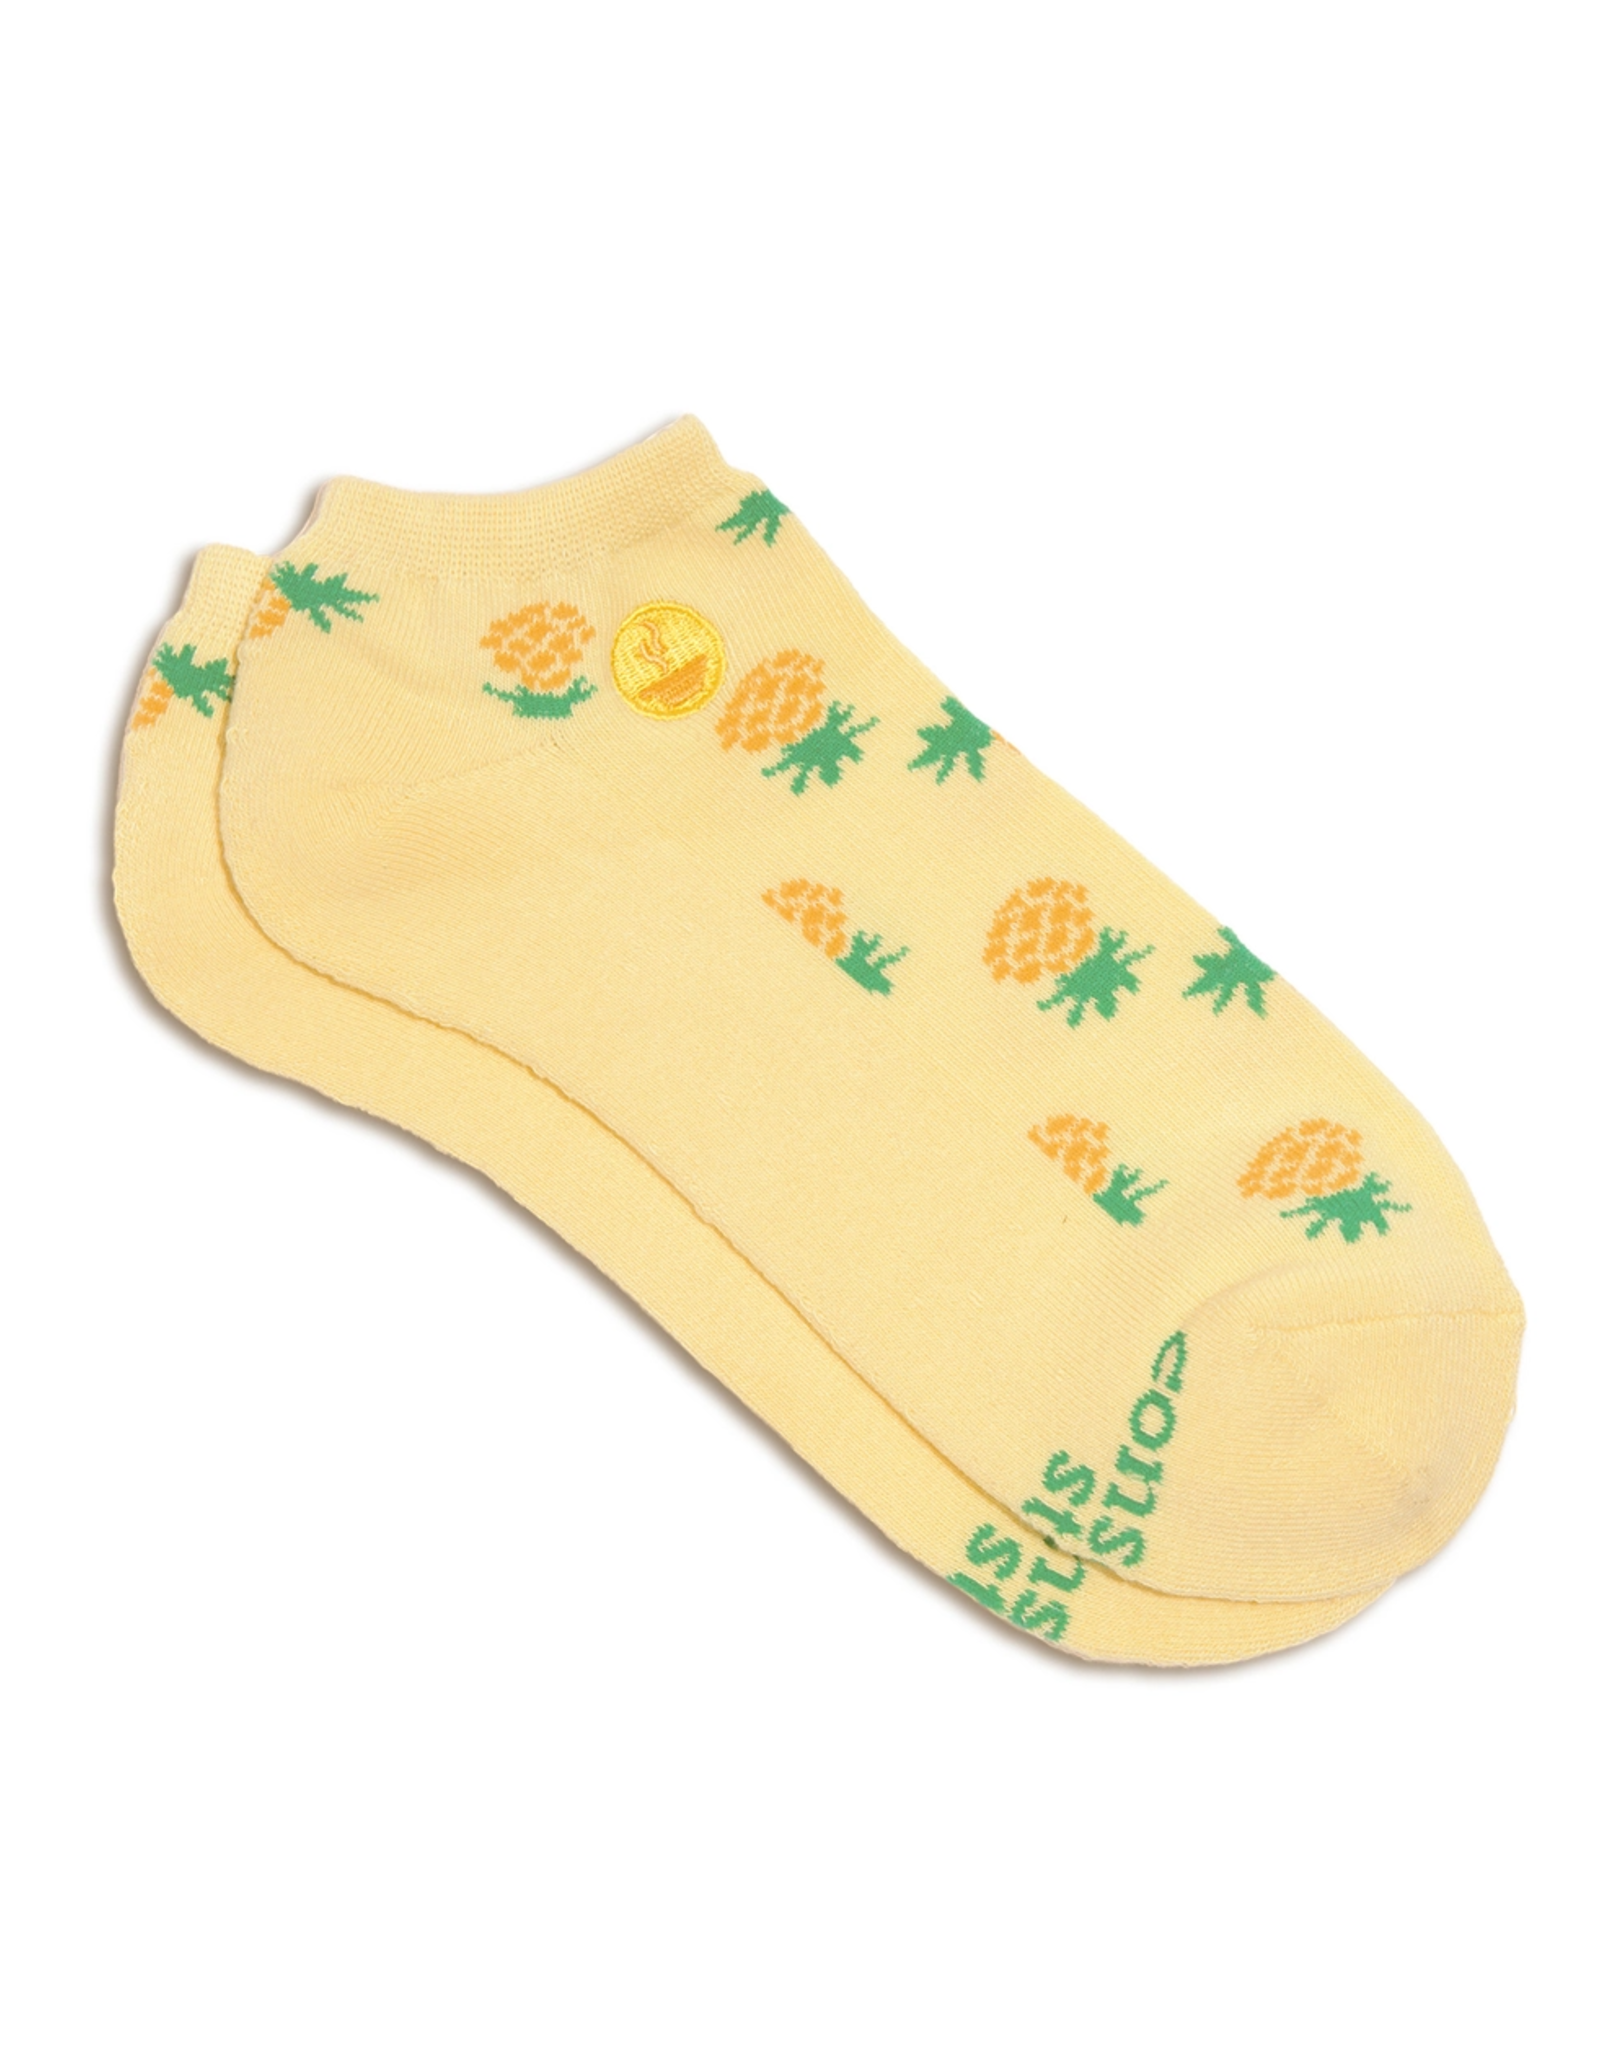 Conscious Step Ankle Socks that Provide Meals (Golden Pineapples) - Small